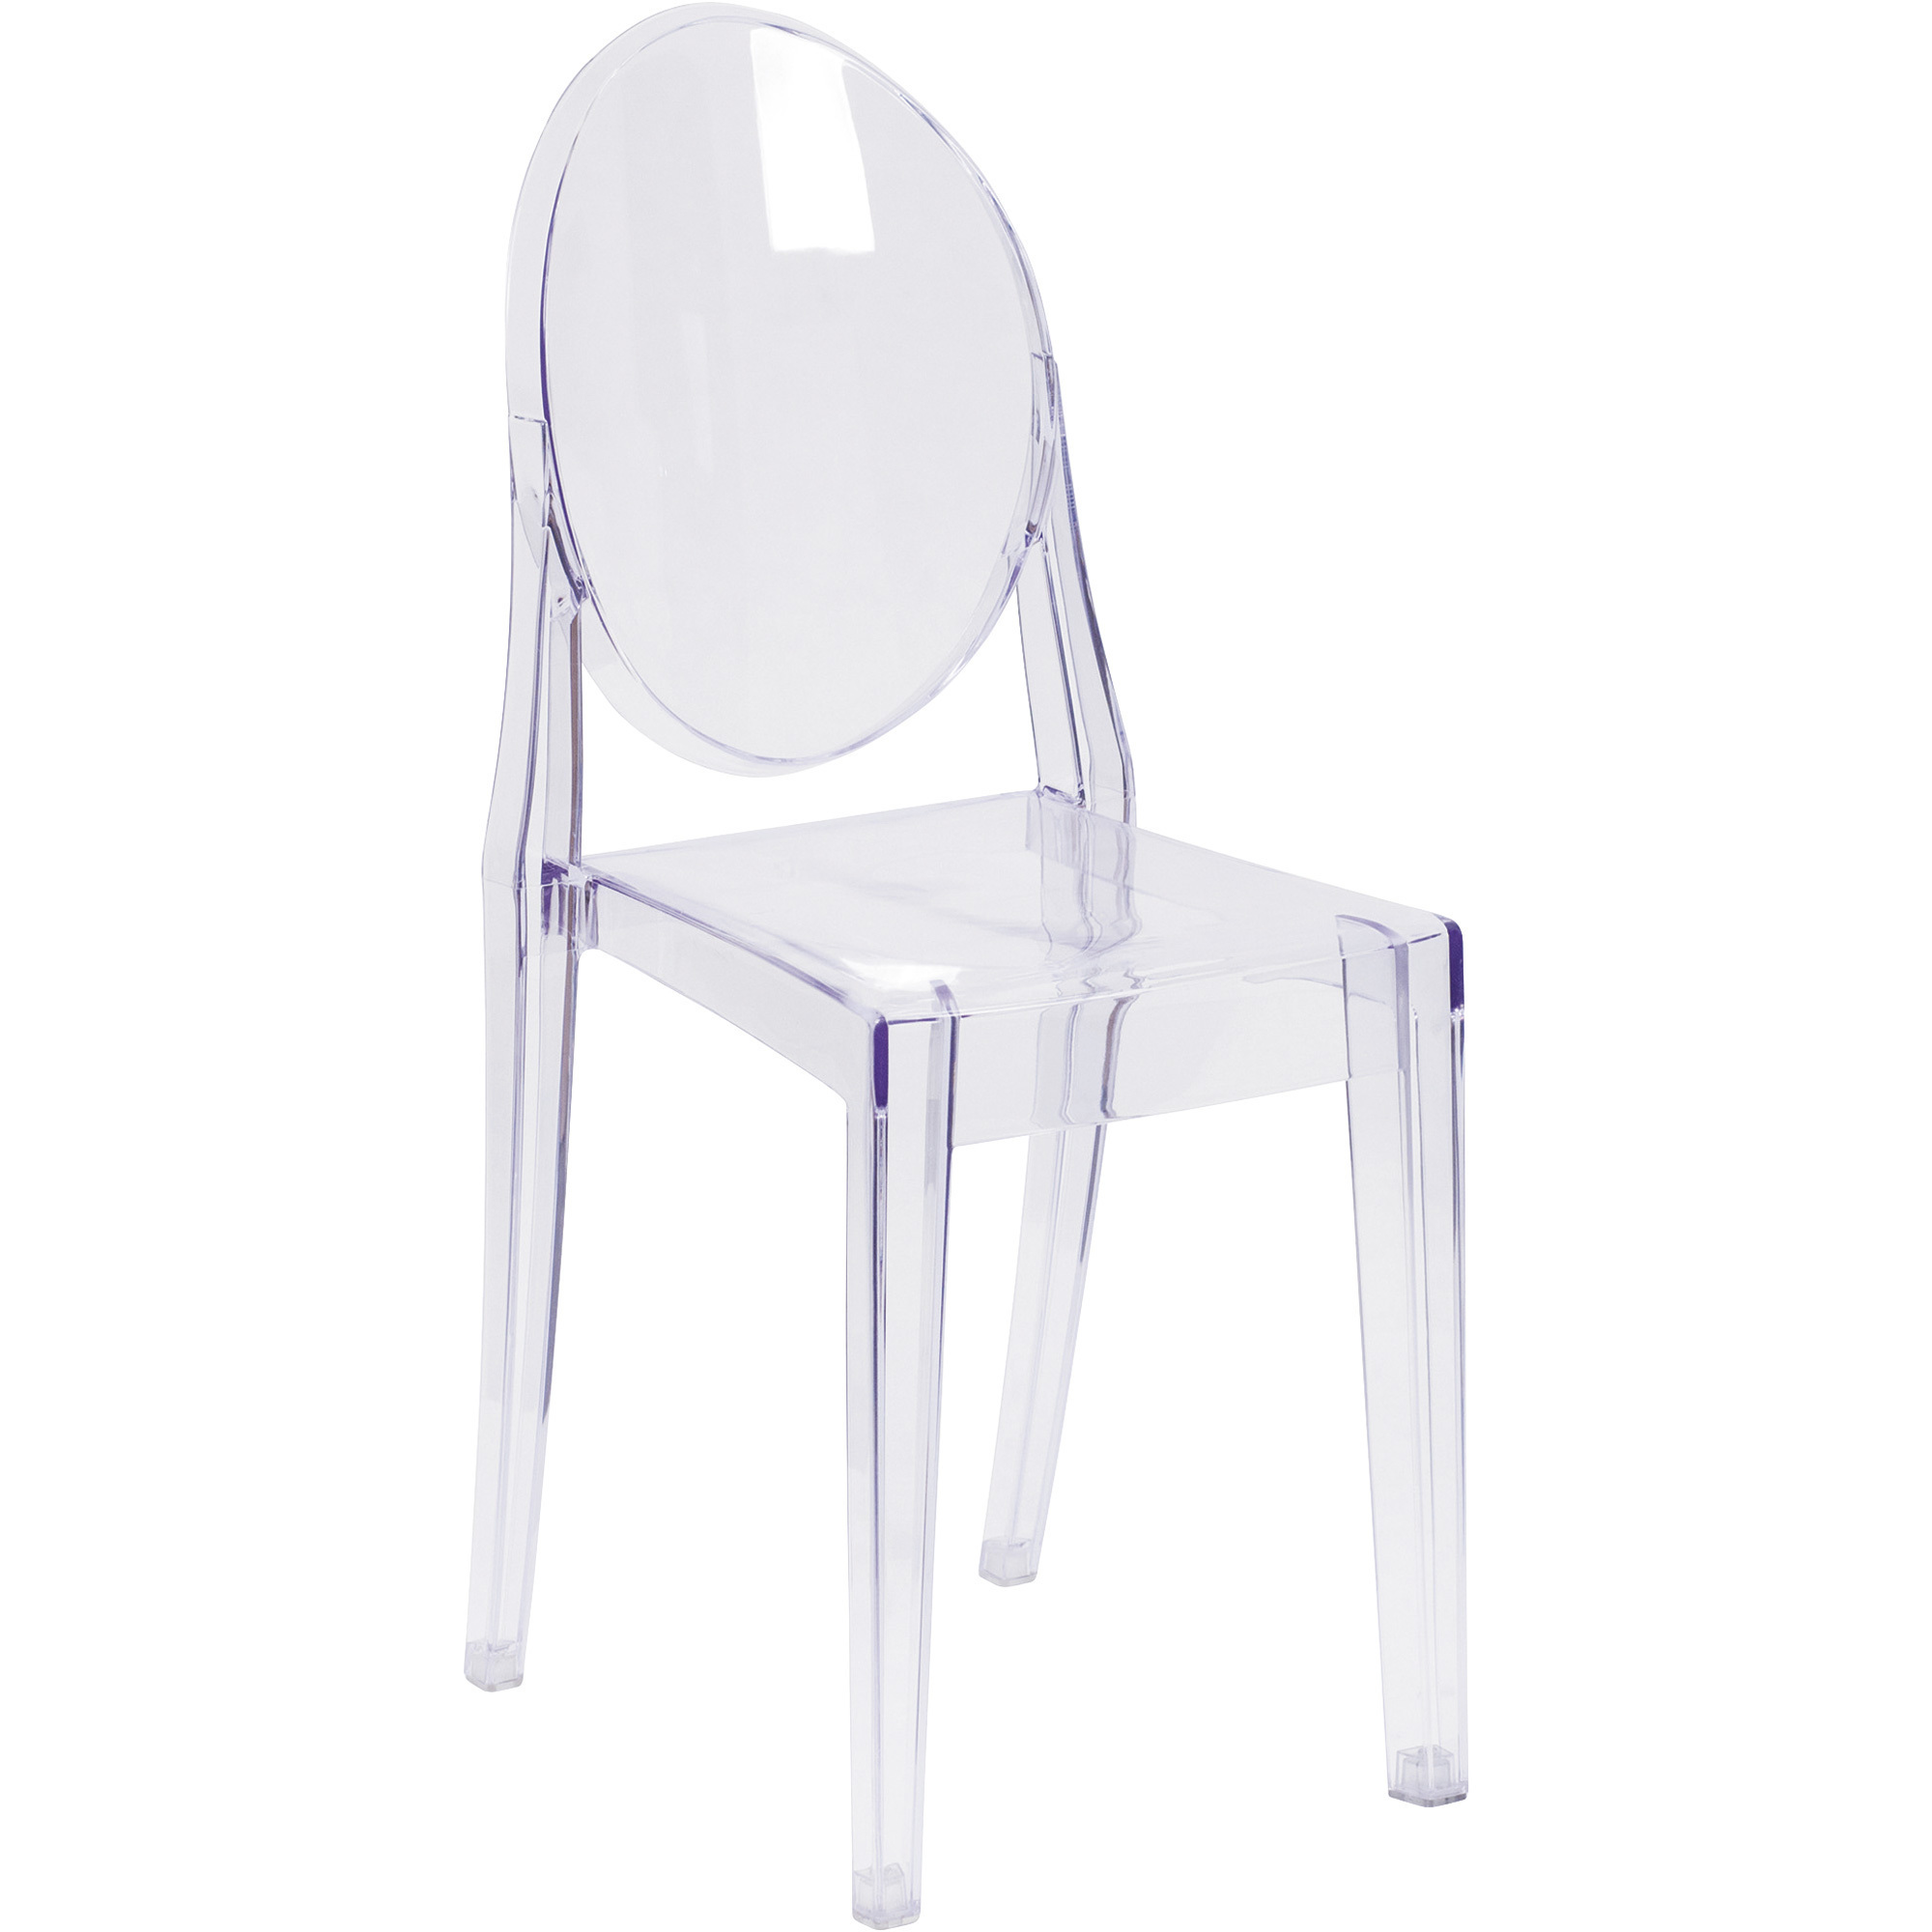 Flash Furniture Transparent Stacking Side Chair â 5Inch W x 19 1/2Inch D x 35 3/4Inch H, Model FH111APCCLR